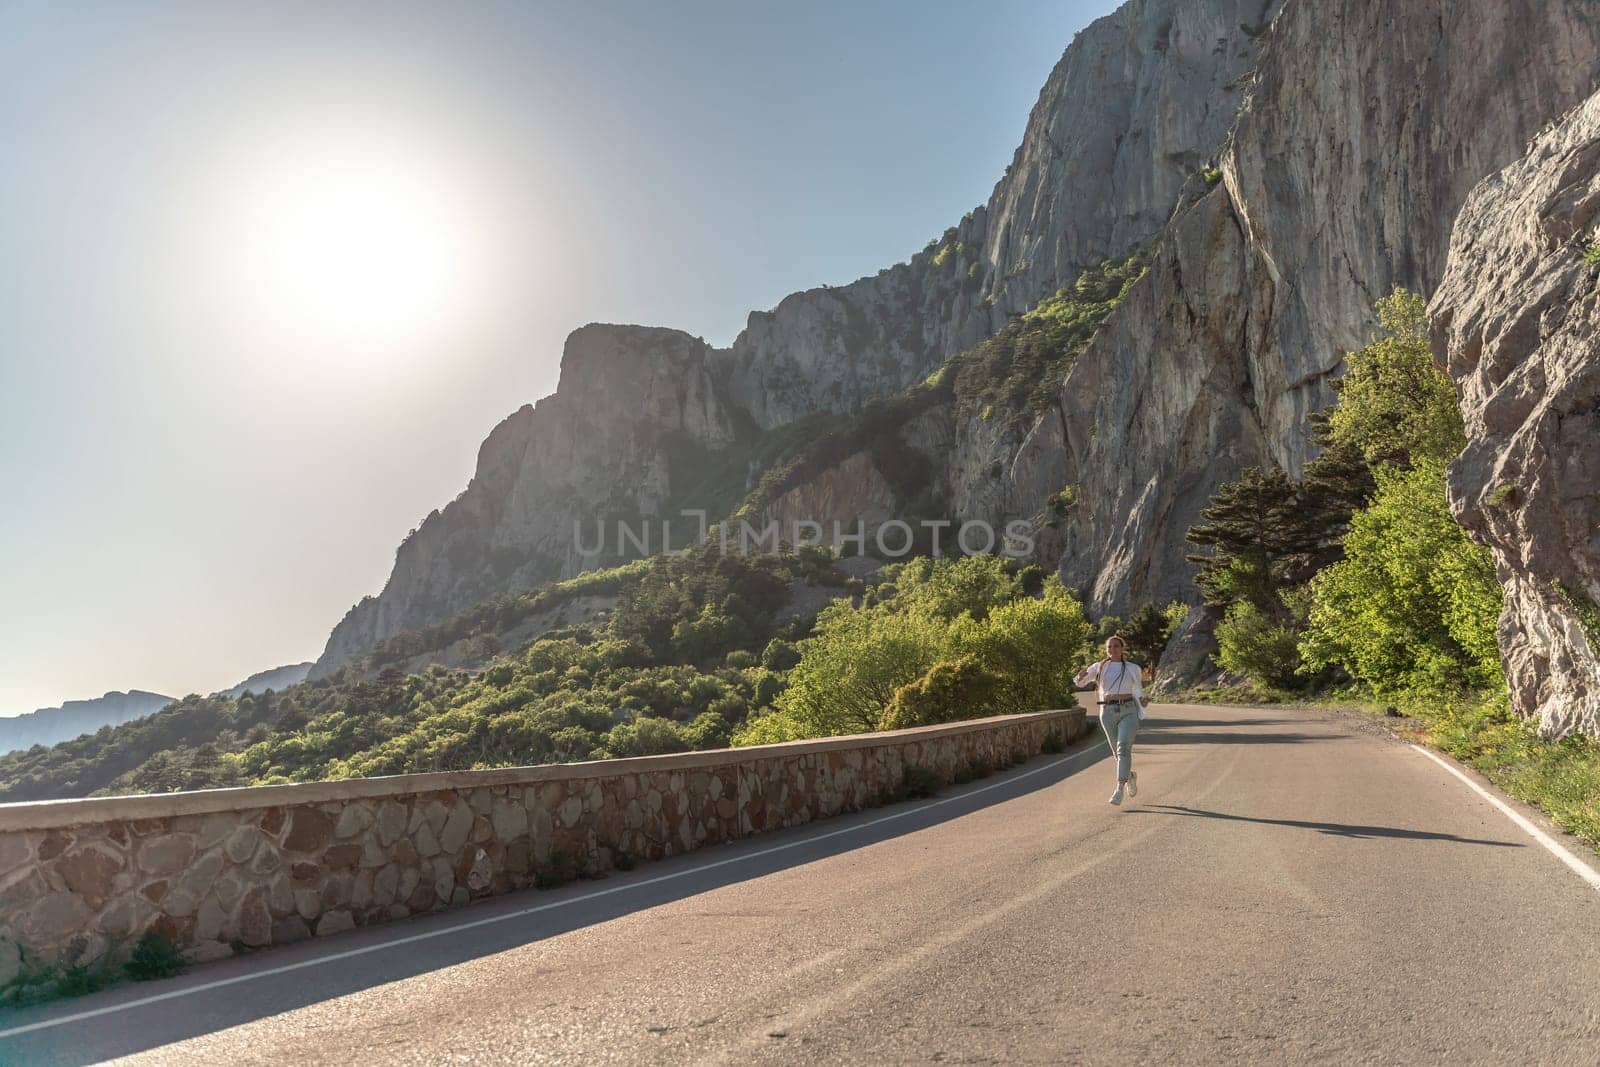 A woman runs along an asphalt road in the middle of a mountainous area. She is dressed in jeans and a white shirt, her hair is braided. A traveler in the mountains rejoices in nature